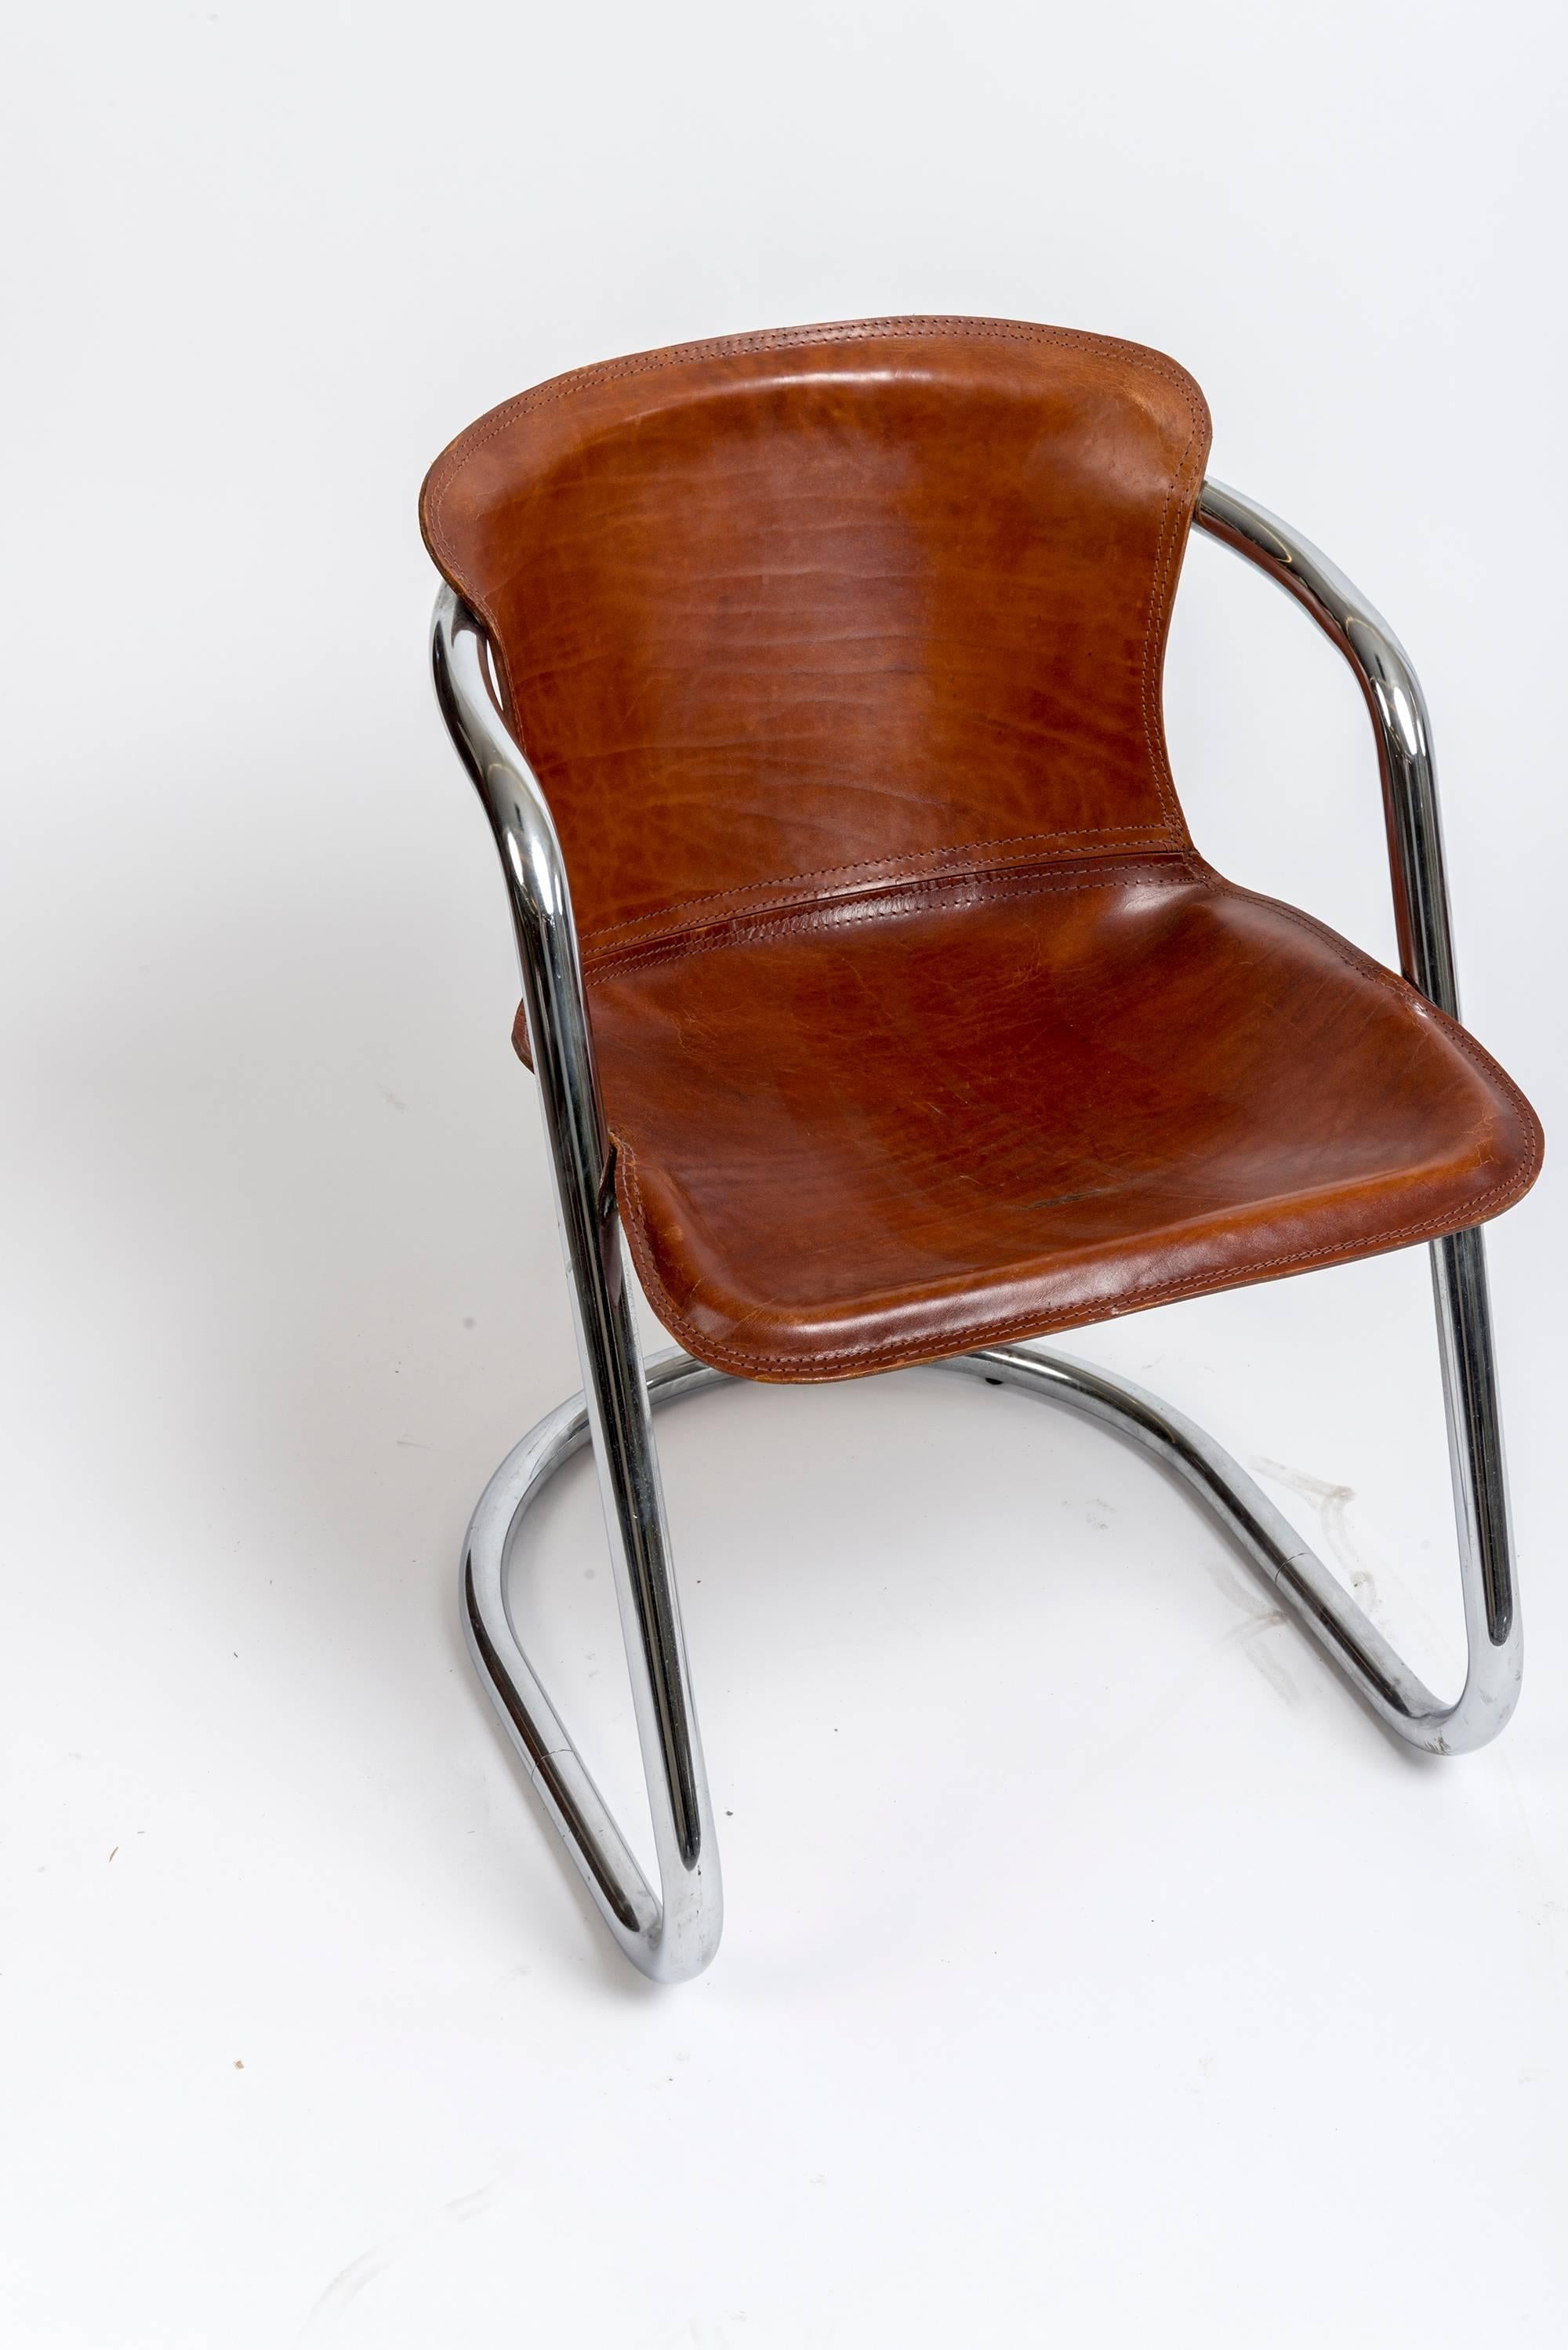 Set of Willy Rizzo Dining Chairs with Cognac Leather 2